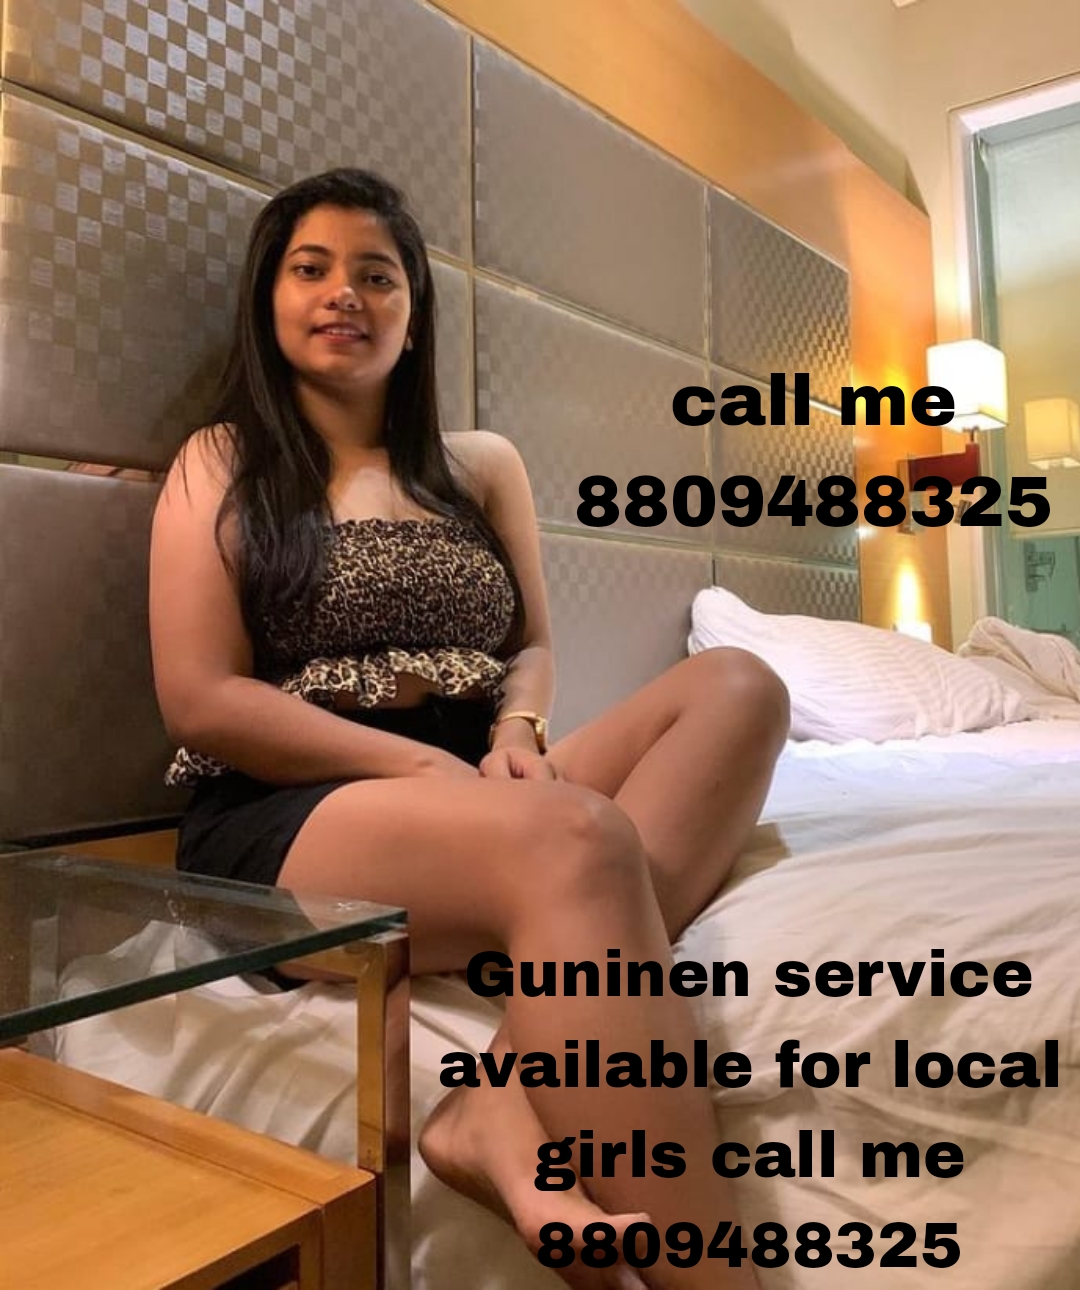 Guninen service available for Trust service available 